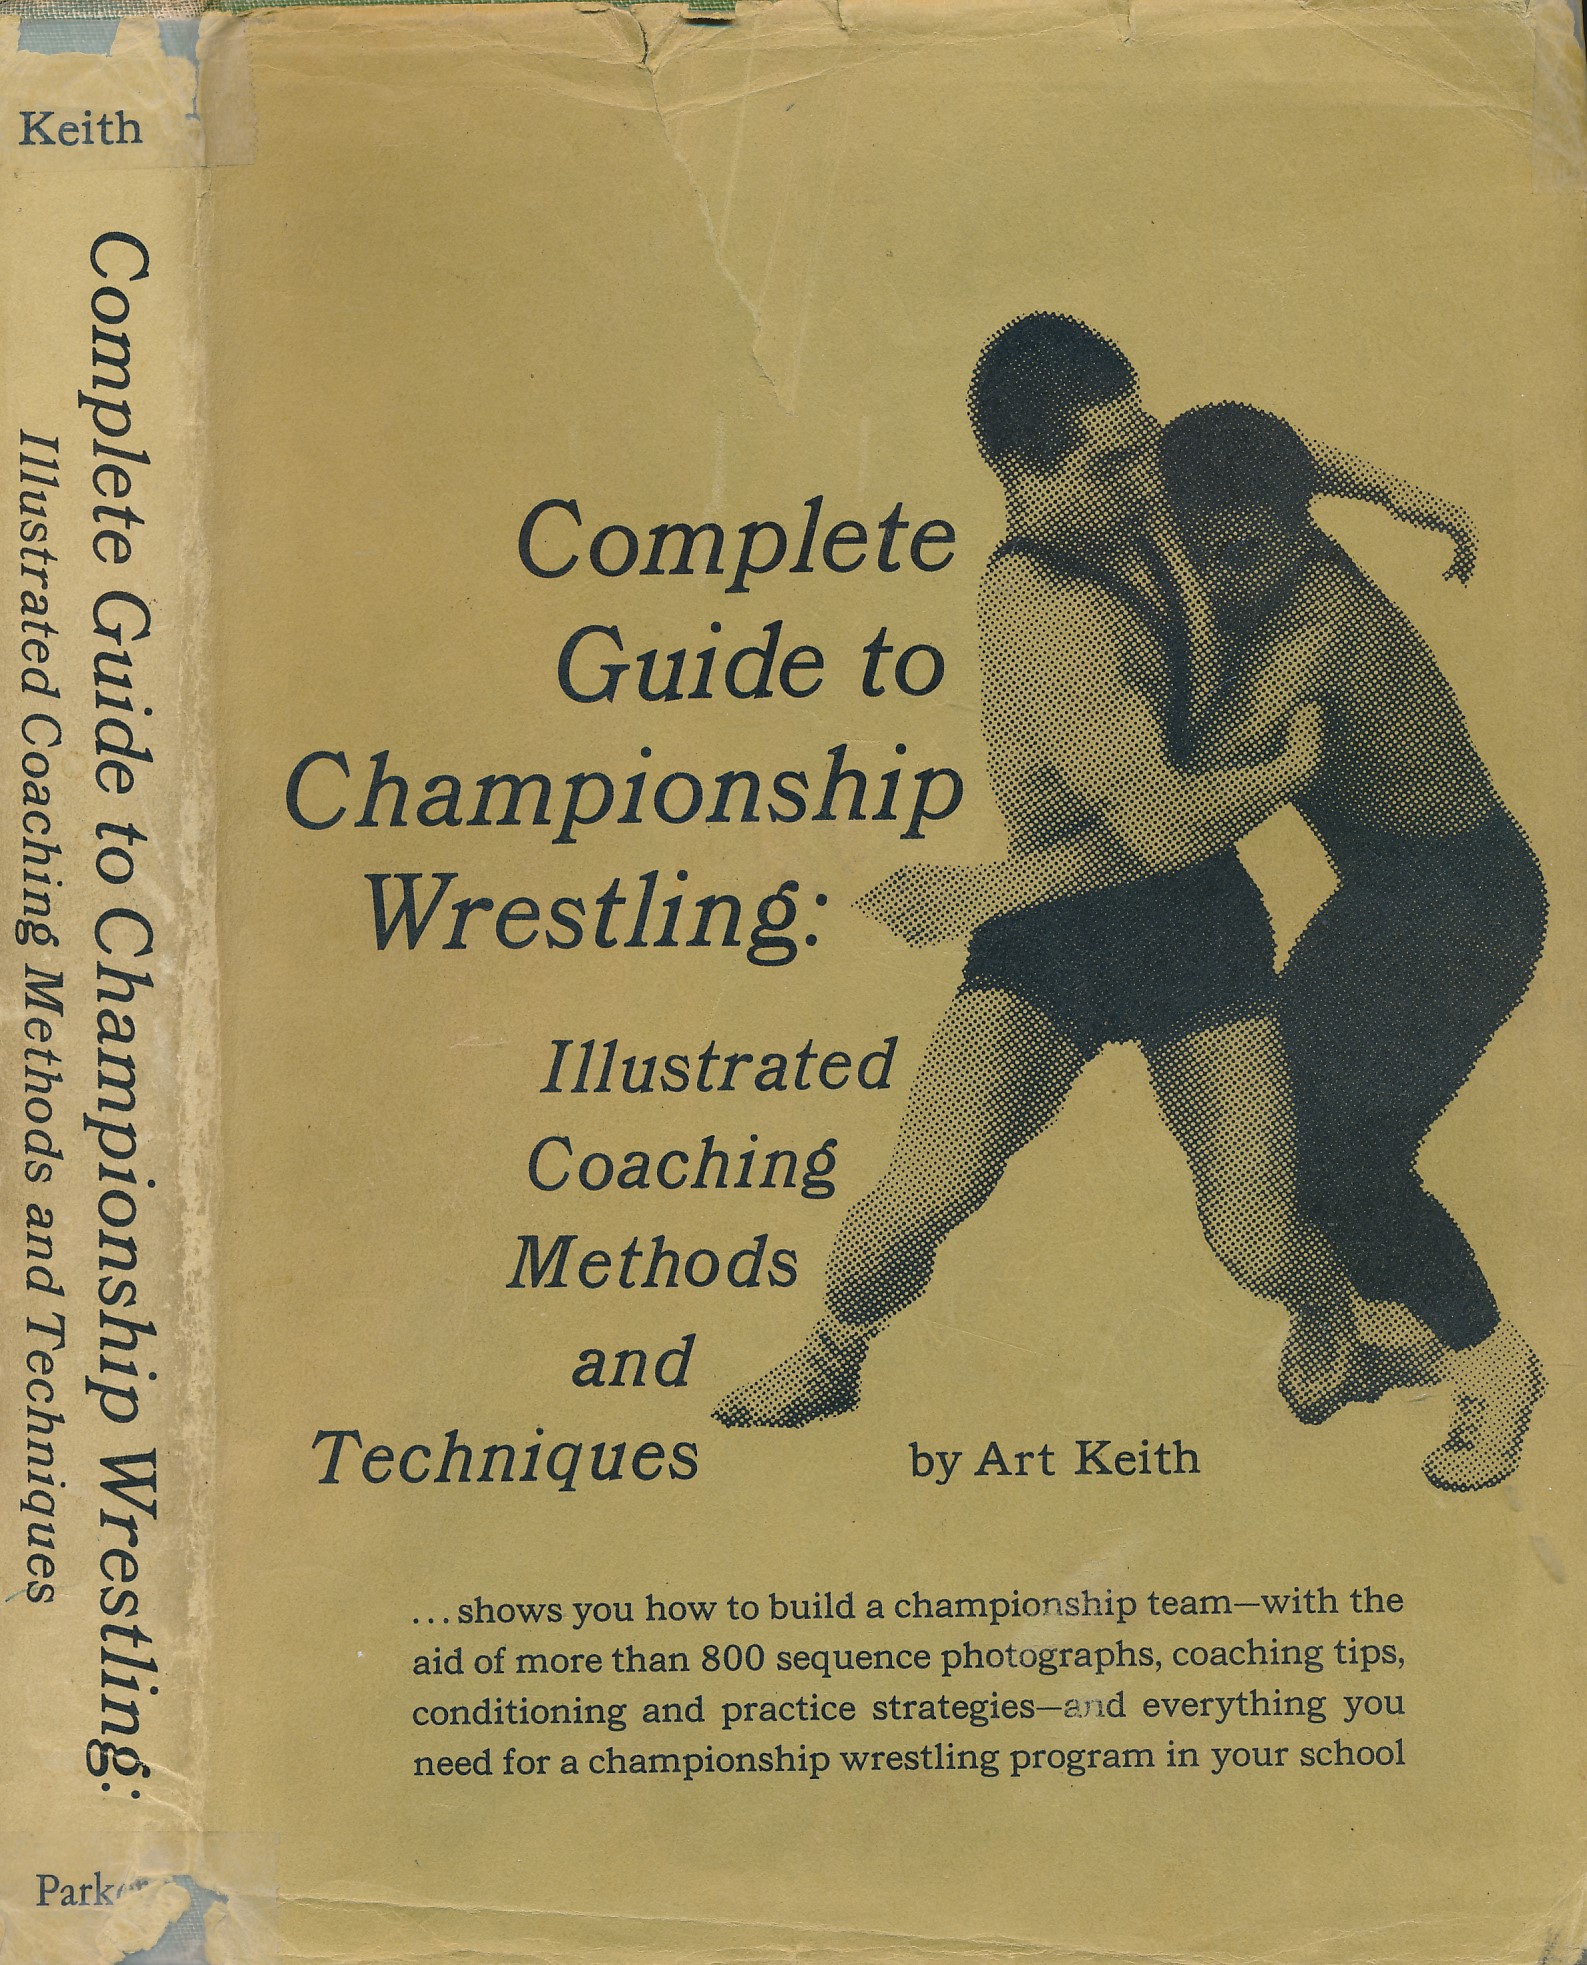 Complete Guide to Championship Wrestling: Illustrated Coaching Methods and Techniques